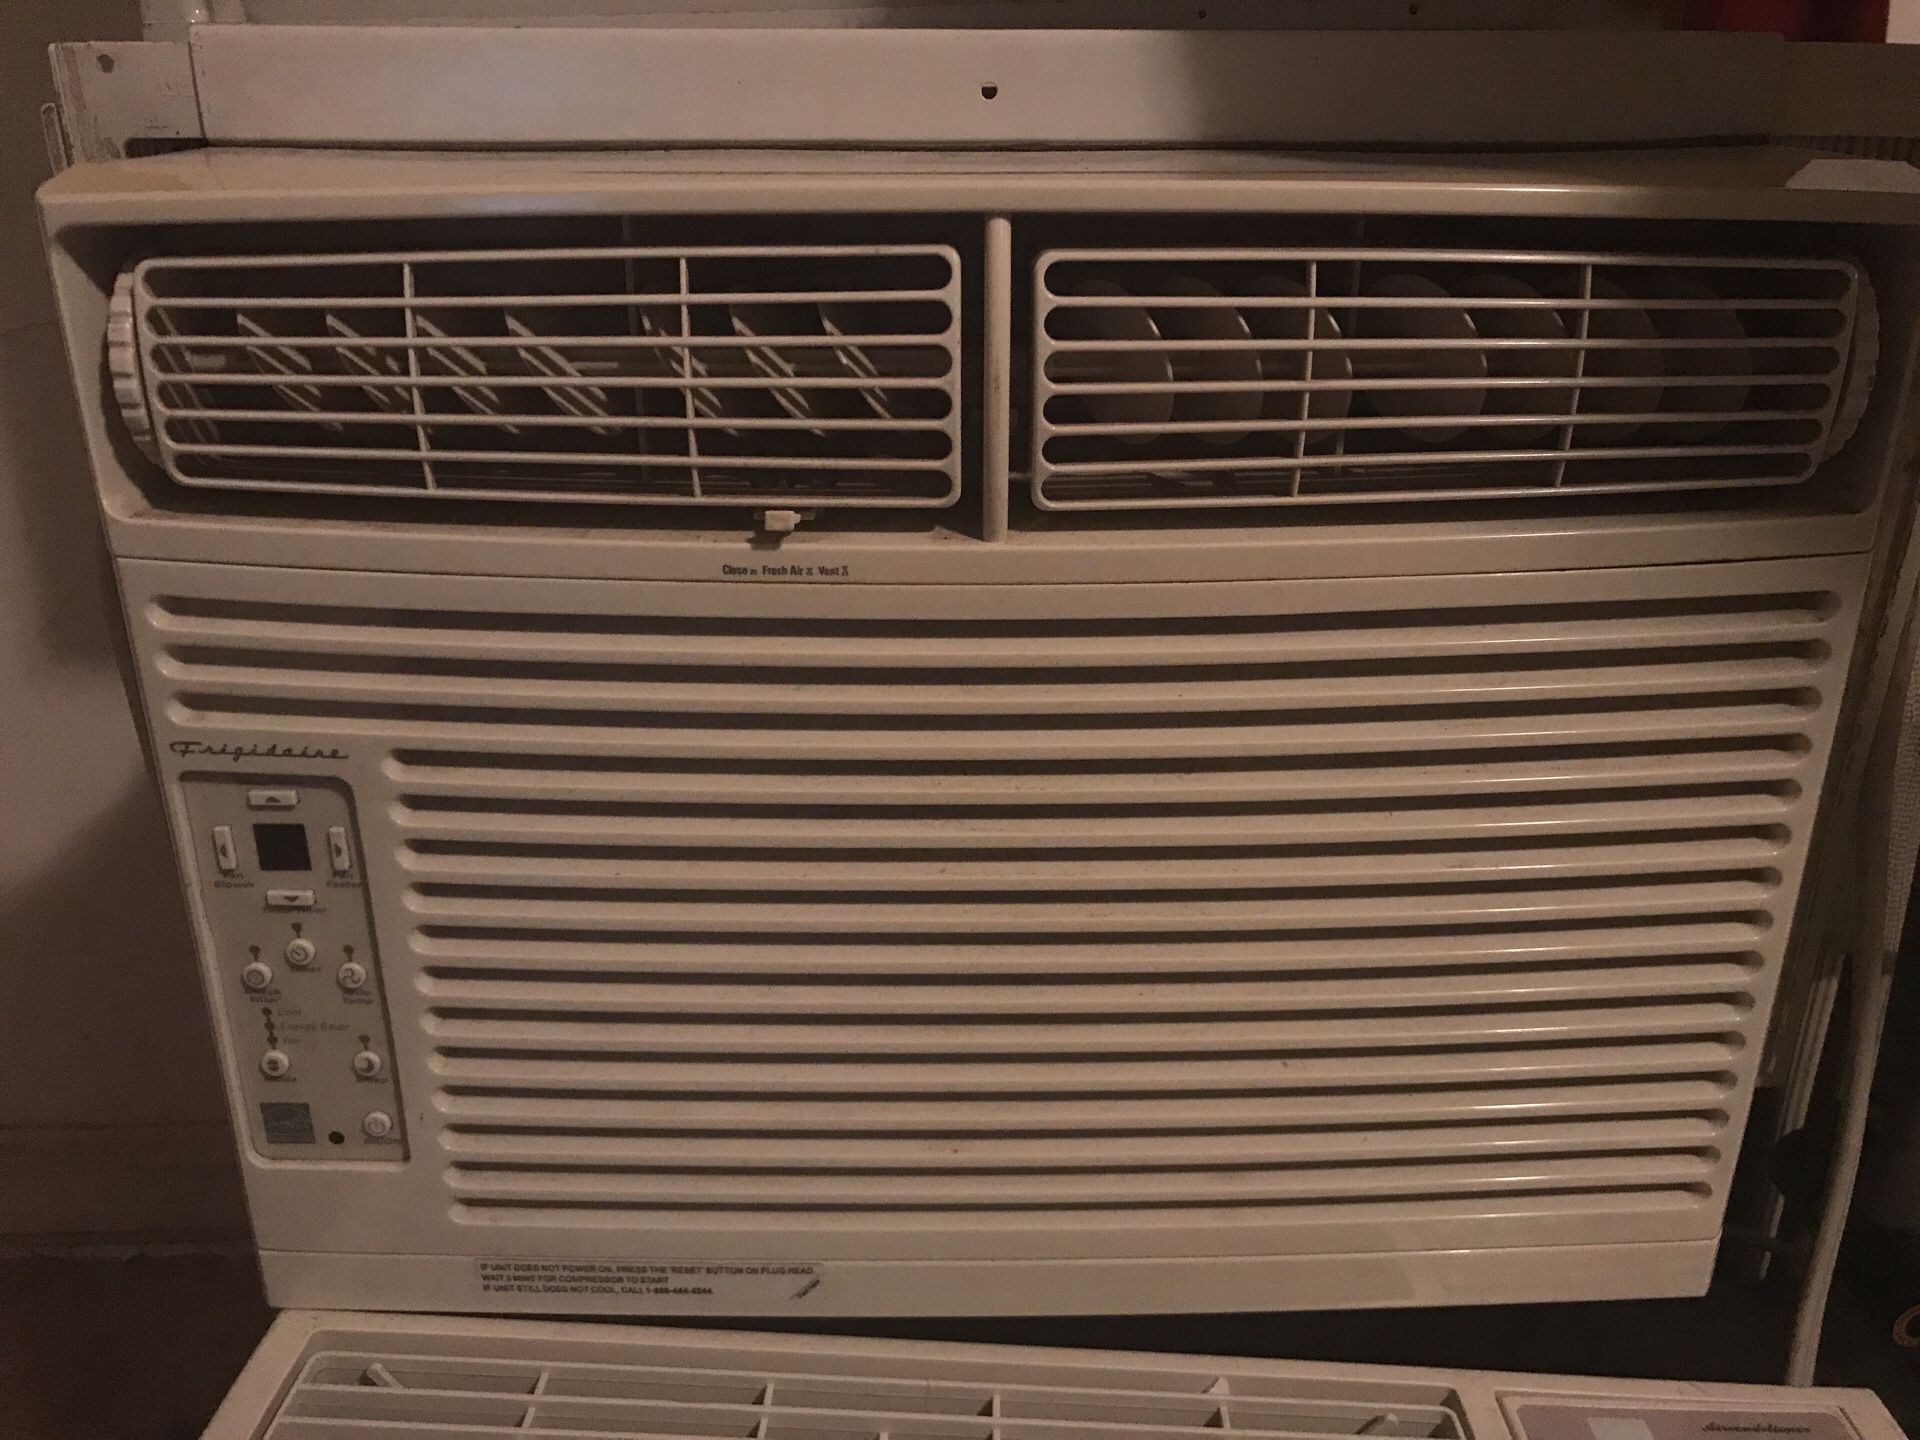 10,000 BTU air conditioner in excellent condition blows very cold air